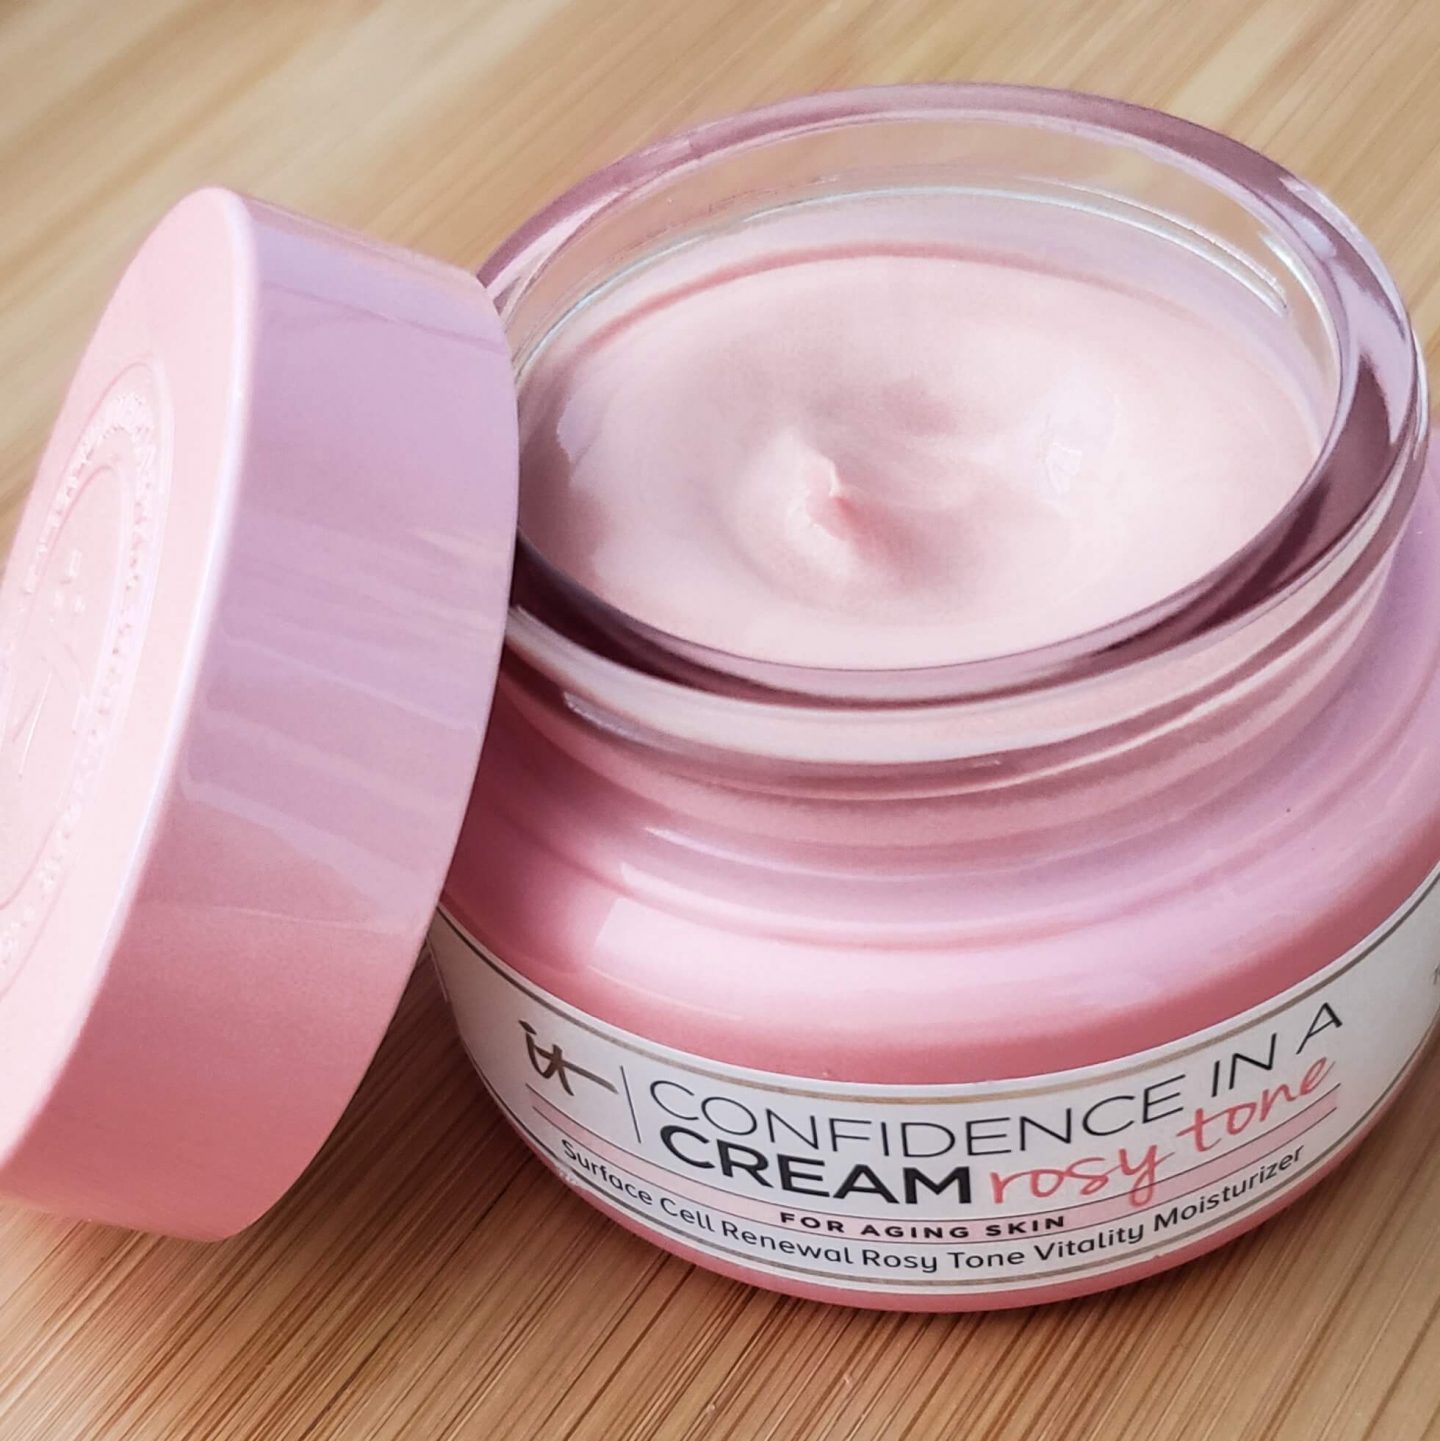 New Beauty Faves - It Cosmetics Confidence In A Cream Rosy Tone